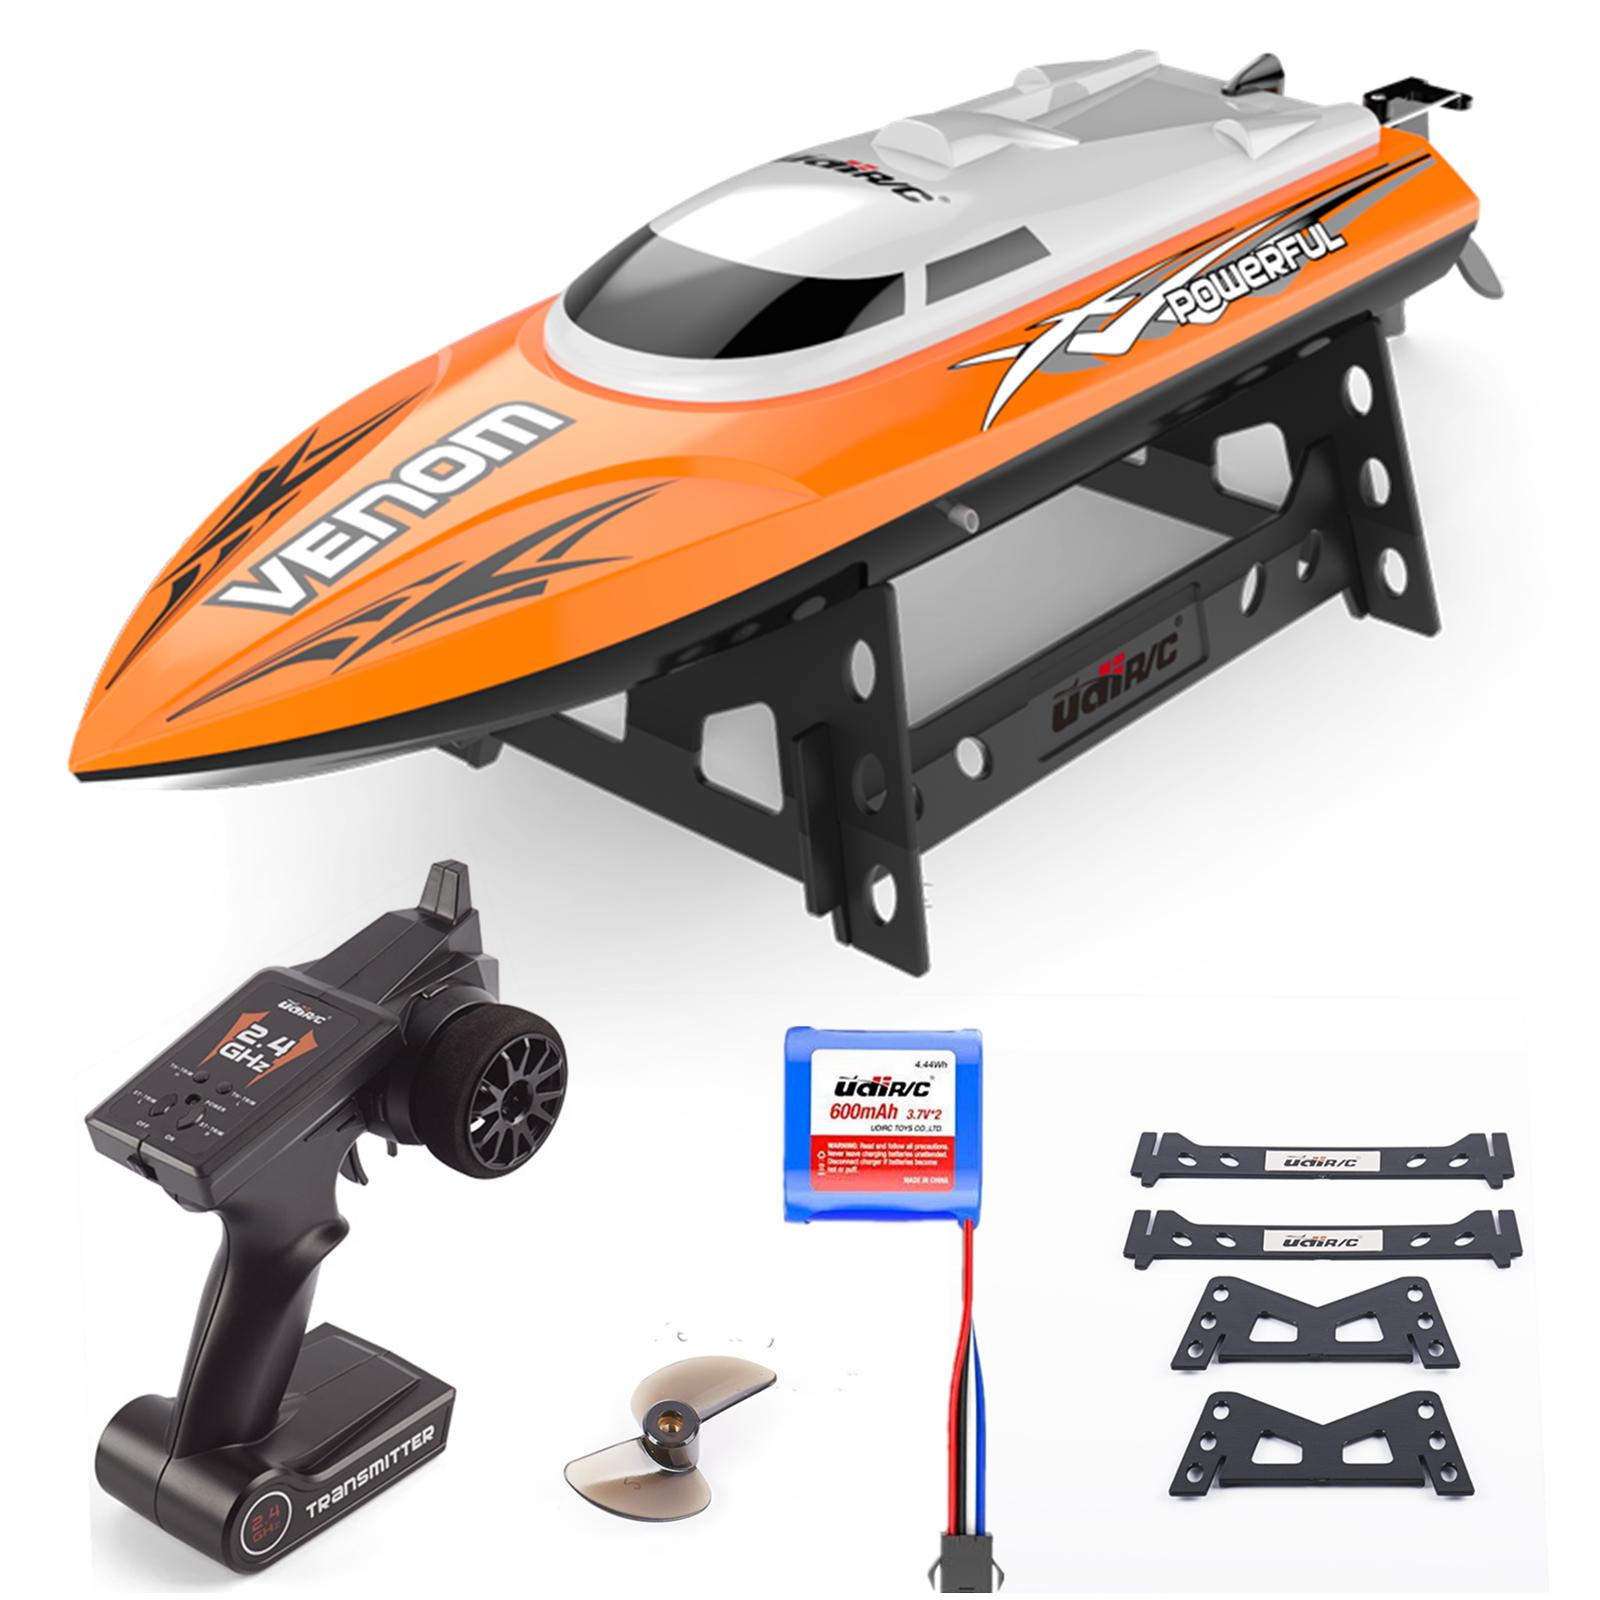 Cheerwing Udi 2.4 Ghz Rc Racing Boat: Unleash the Ultimate RC Racing Experience with the Cheerwing UDI 2.4GHz Boat!